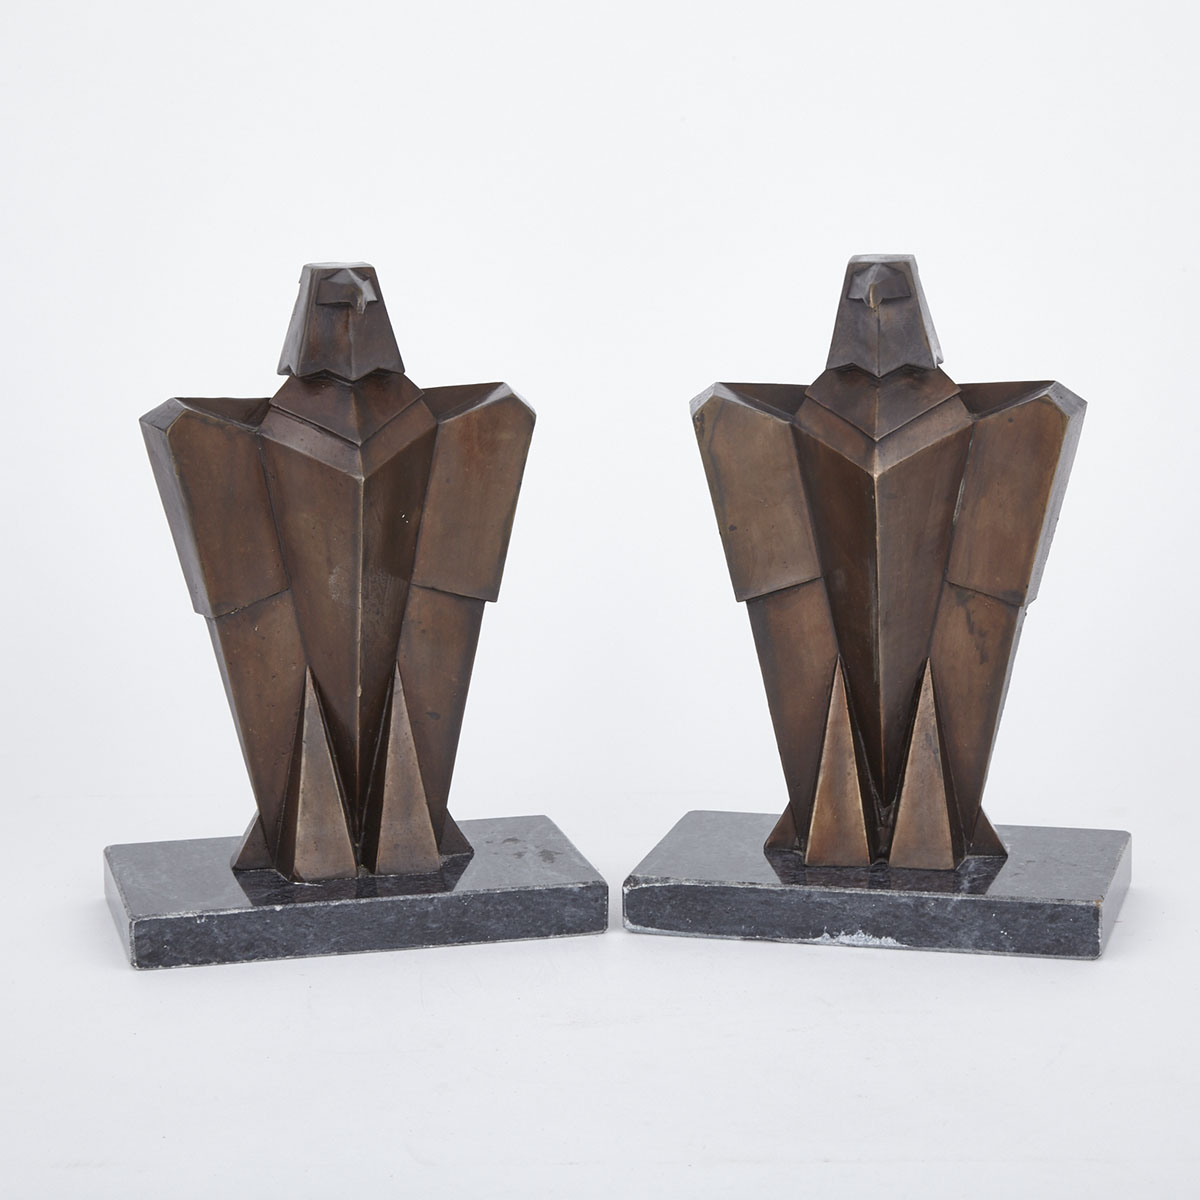 Pair of Art Deco Style Patinated Bronze Eagle Form Bookends, 20th century